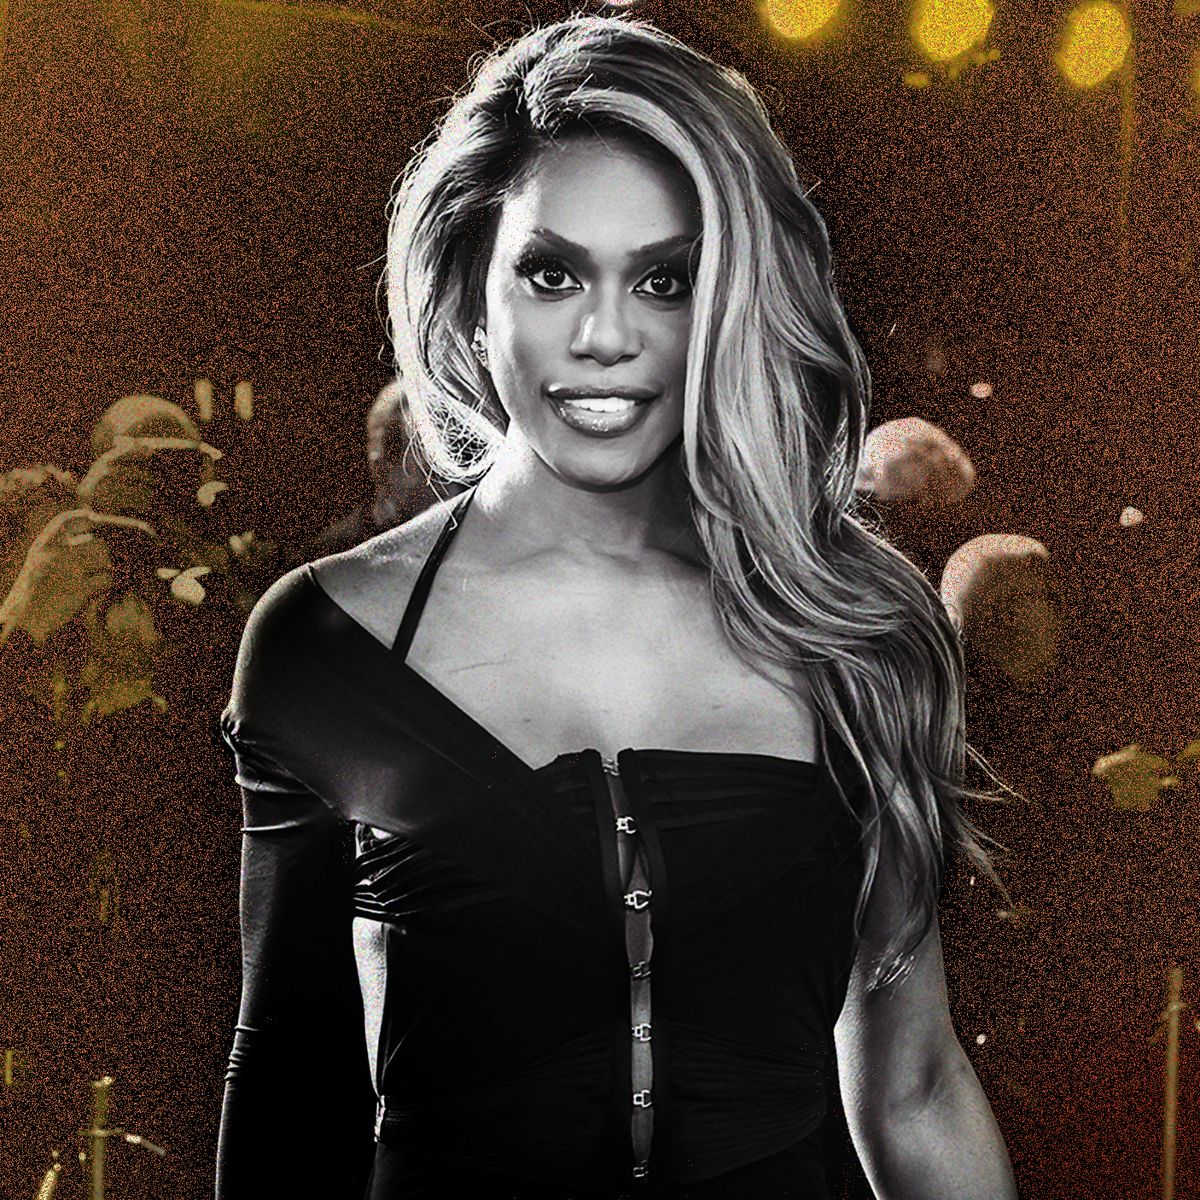 Laverne Cox 'So Excited' About Turning 50, No Longer 'Lying About